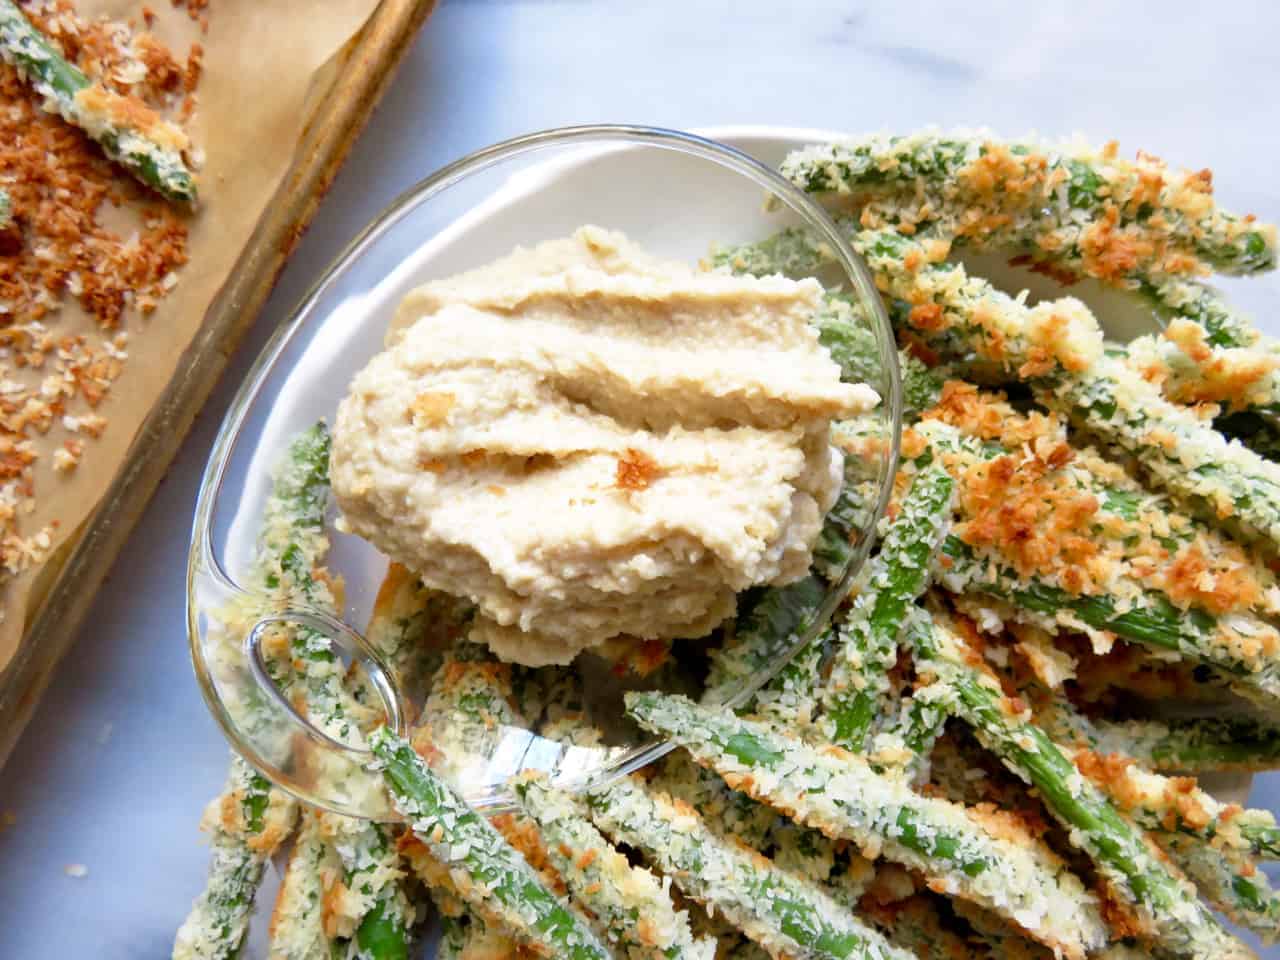 Coconut Crusted Green Beans + Cashew Dip